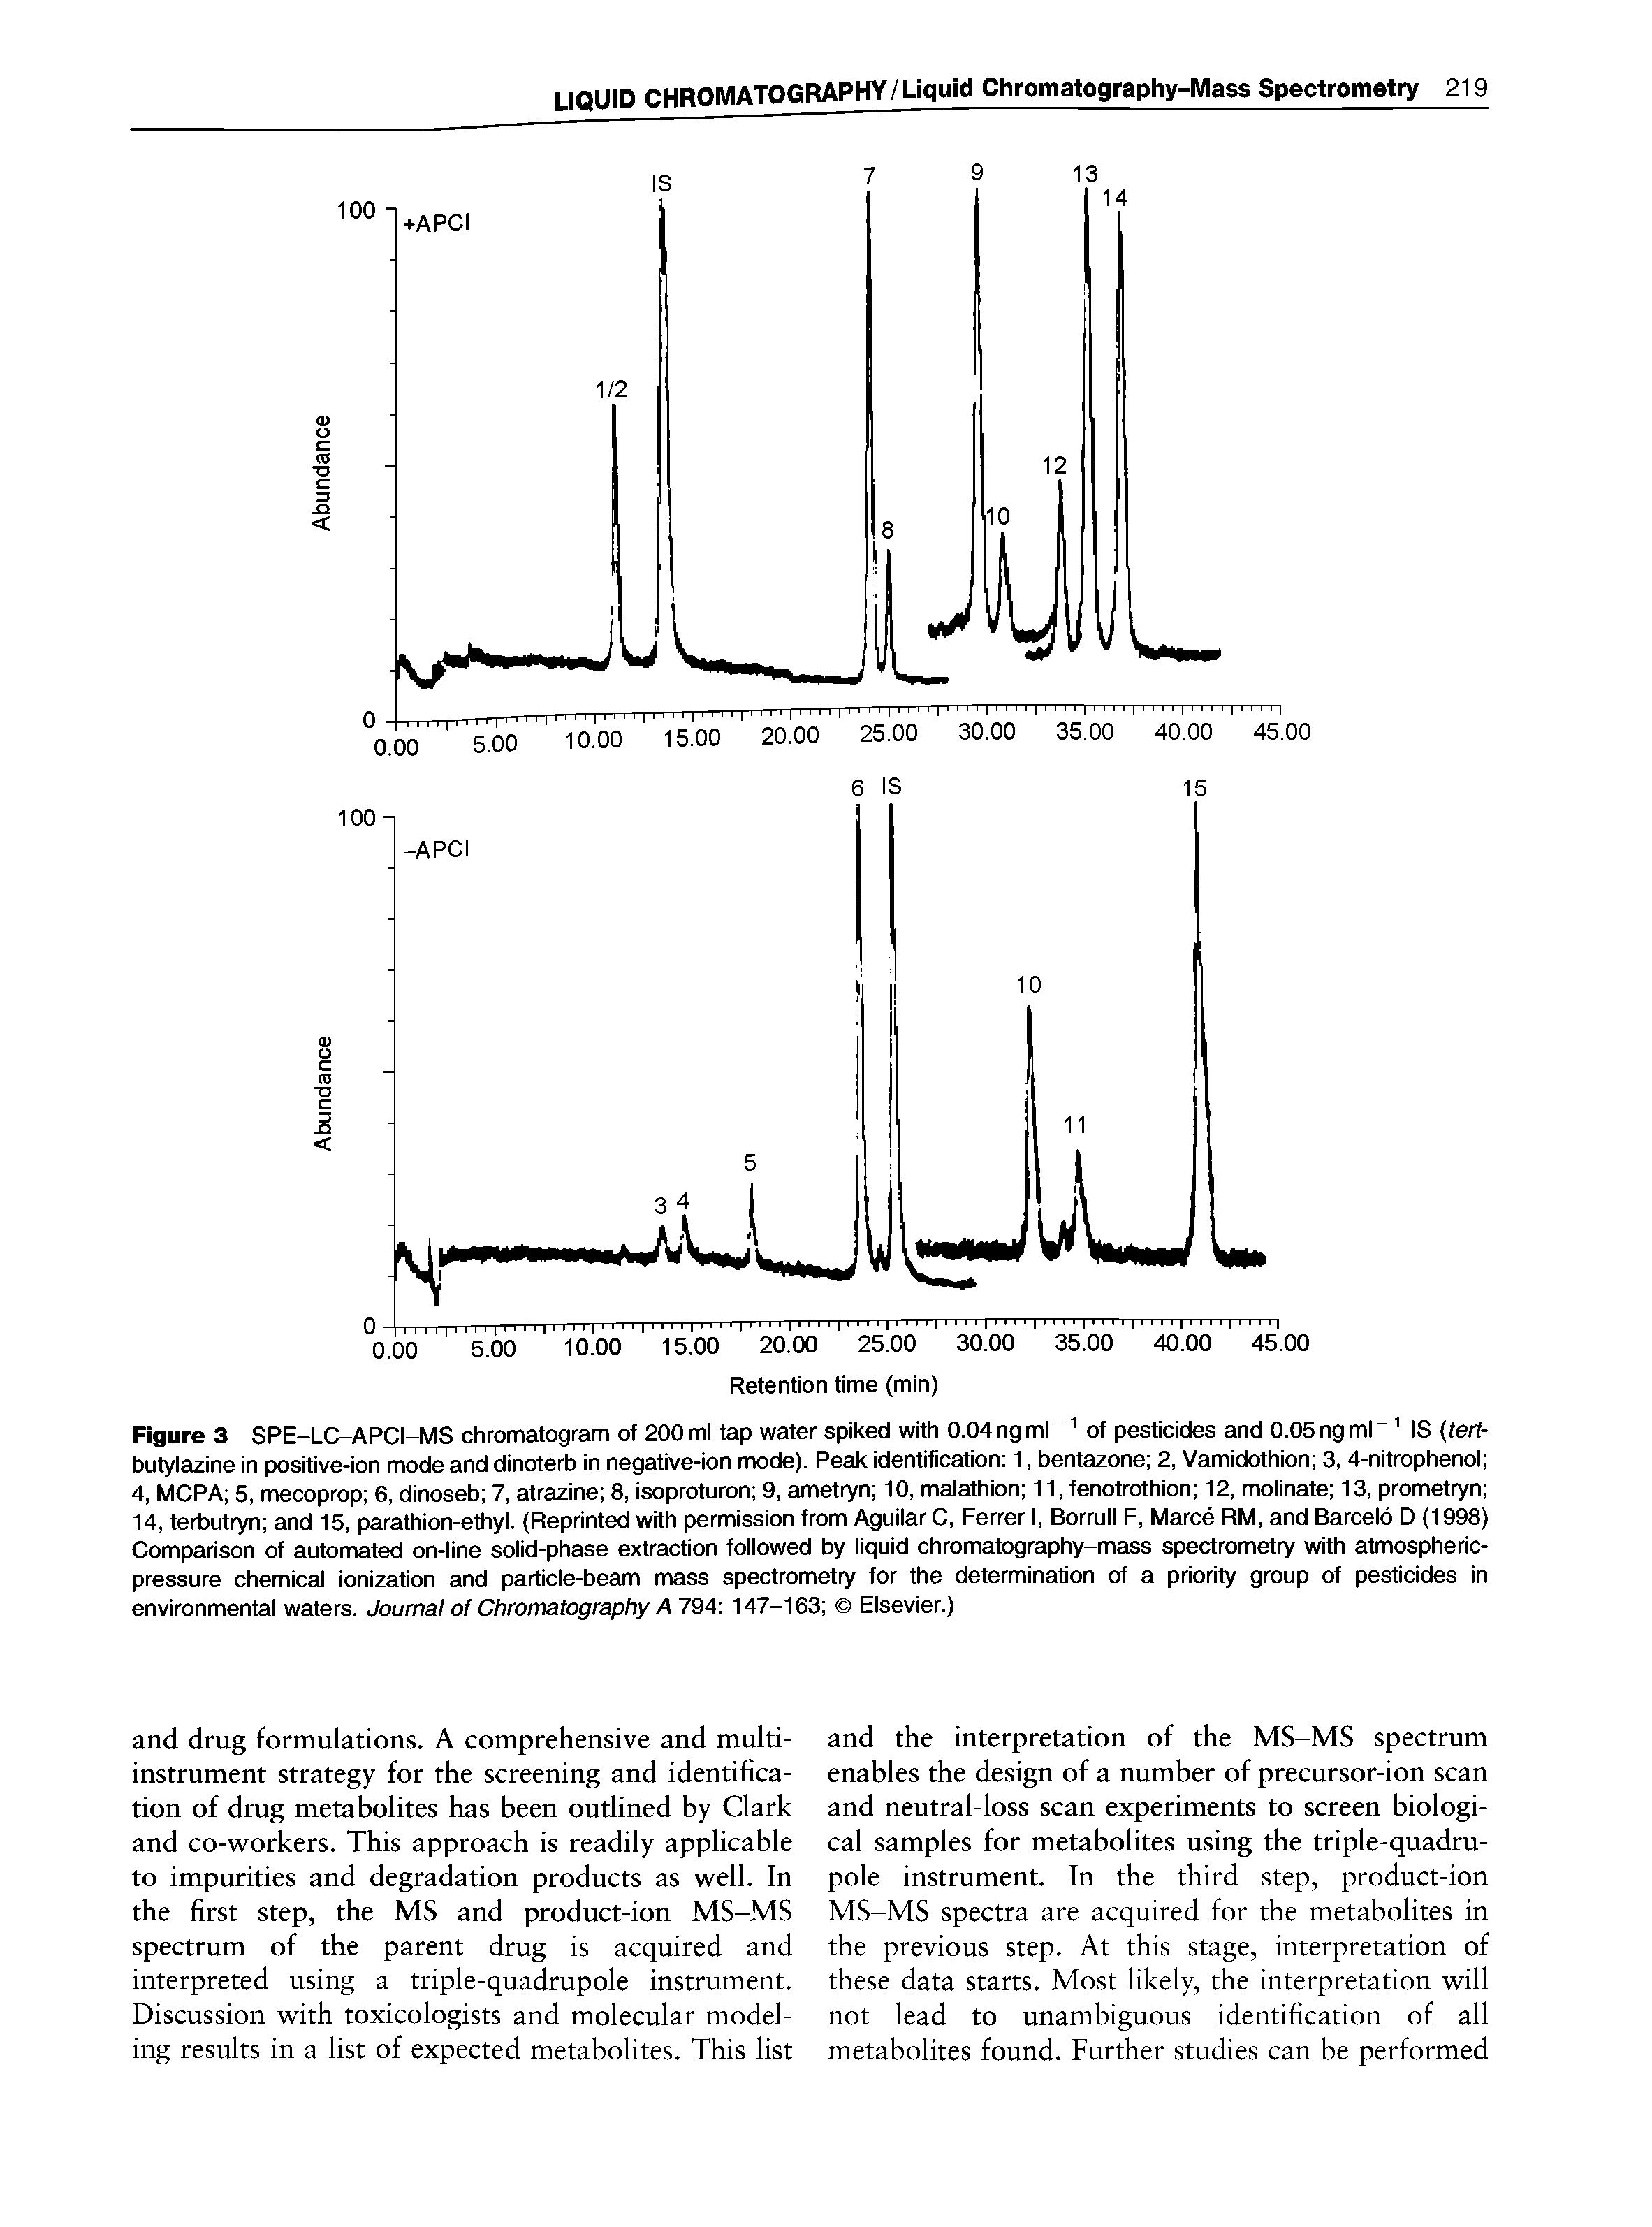 Figure 3 SPE-LC-APCI-MS chromatogram of 200 ml tap water spiked with 0.04 ng ml of pesticides and 0.05 ng ml IS tert-butylazine in positive-ion mode and dinoterb in negative-ion mode). Peak identification 1, bentazone 2, Vamidothion 3,4-nitrophenol 4, MCPA 5, mecoprop 6, dinoseb 7, atrazine 8, isoproturon 9, ametryn 10, malathion 11, fenotrothion 12, molinate 13, prometryn 14, terbutryn and 15, parathion-ethyl. (Reprinted with permission from Aguilar C, Ferrer I, Bormll F, Marce RM, and Barcelo D (1998) Comparison of automated on-line solid-phase extraction followed by liquid chromatography-mass spectrometry with atmospheric-pressure chemical ionization and particle-beam mass spectrometry for the determination of a priority group of pesticides in environmental waters. Journal of Chromatography A 794 147-163 Elsevier.)...